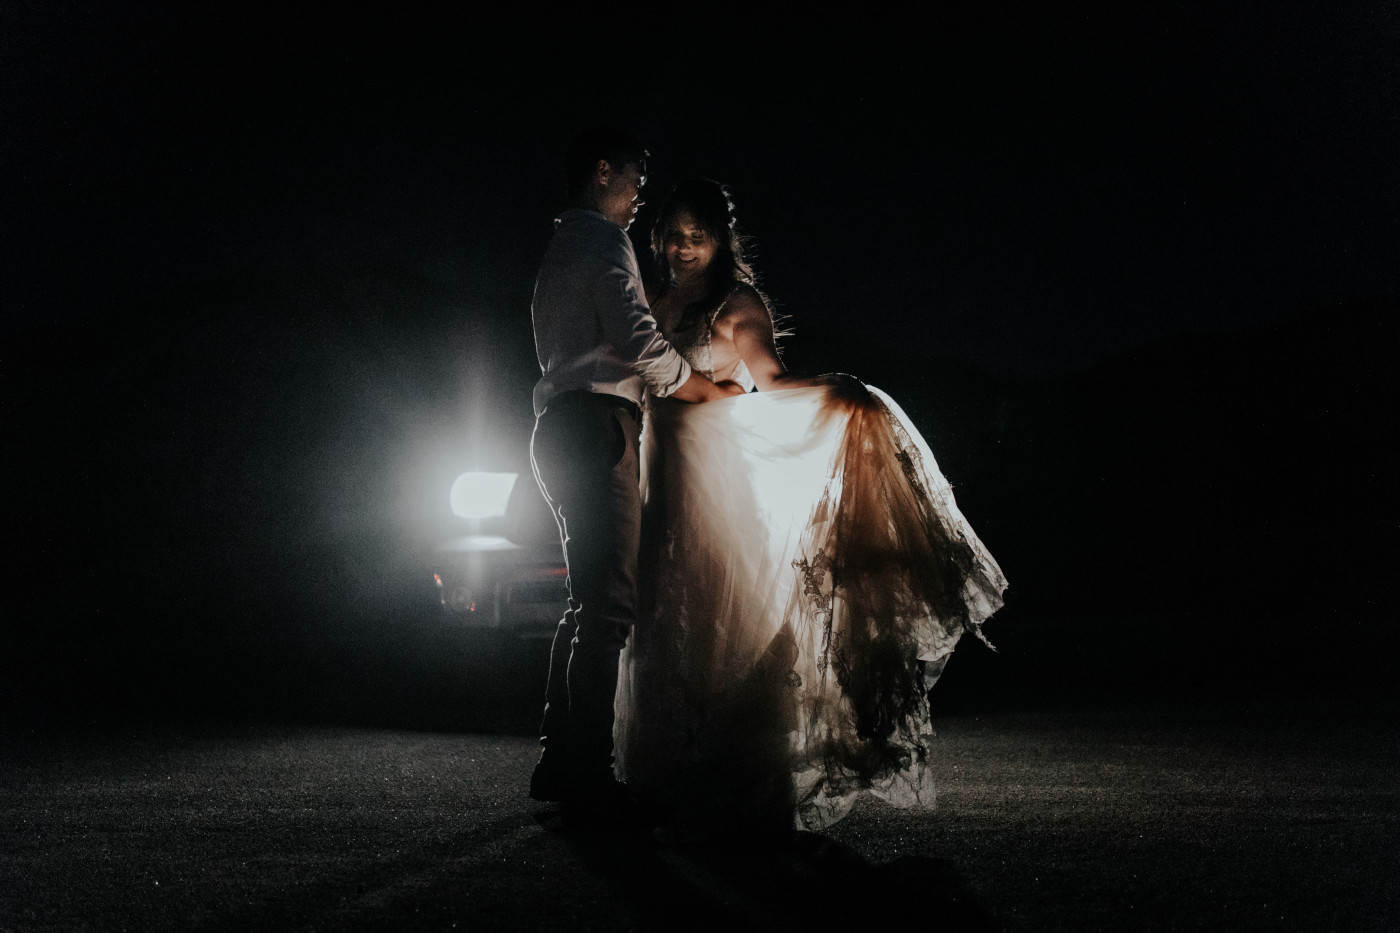 Zack holds Shelby as she holds her dress in front of their car headlights in Joshua Tree.